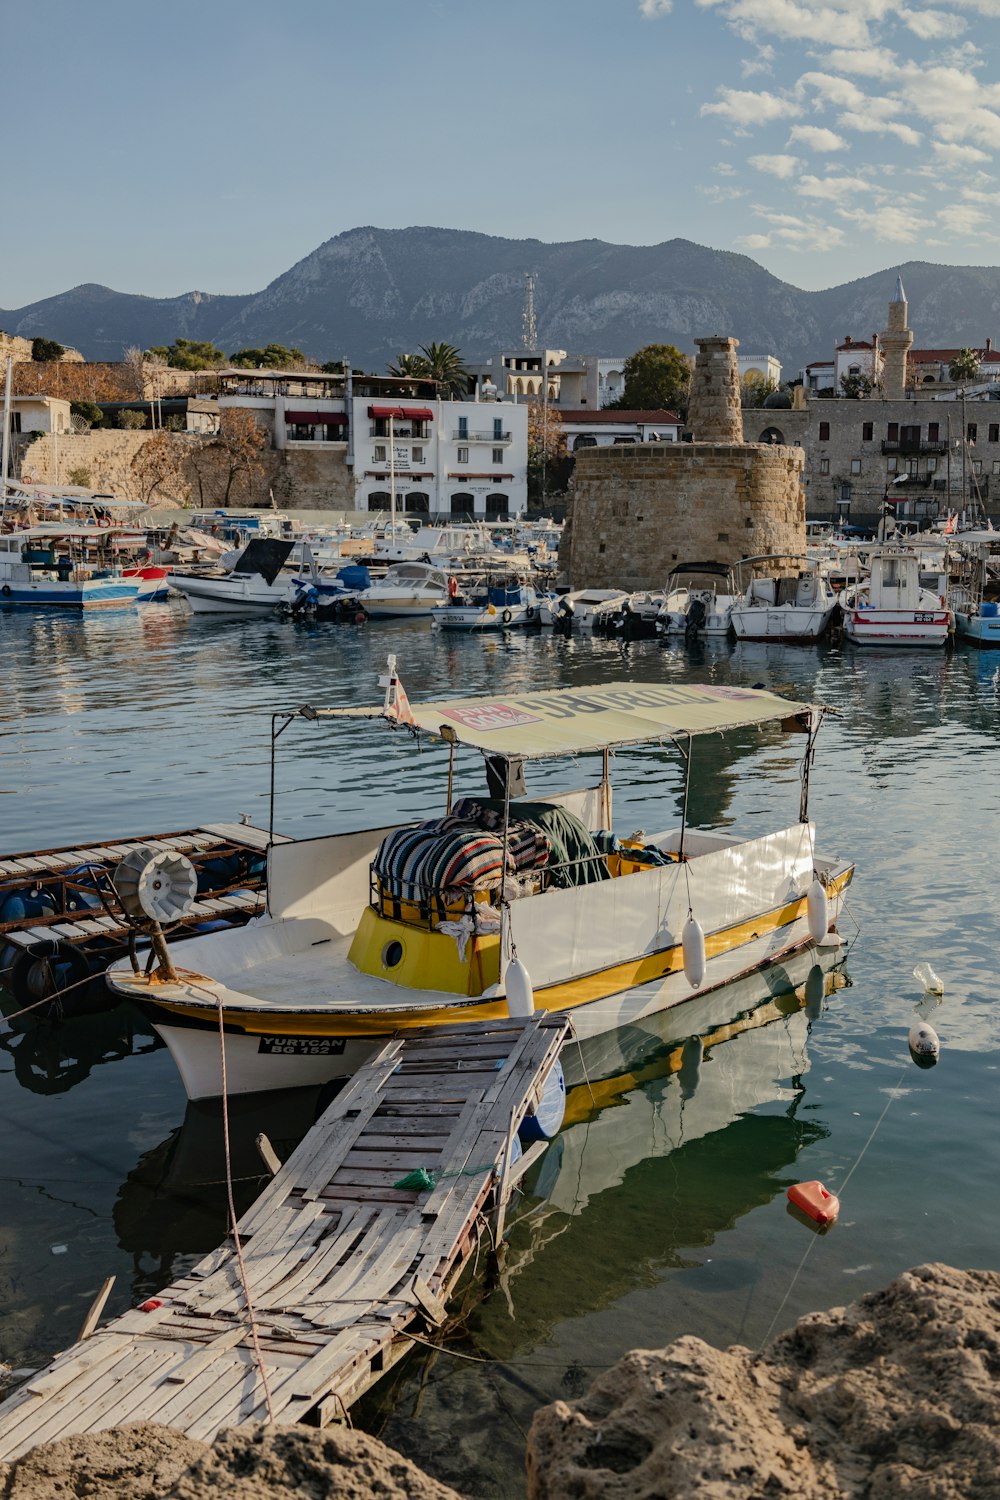 a yellow and white boat docked in a harbor